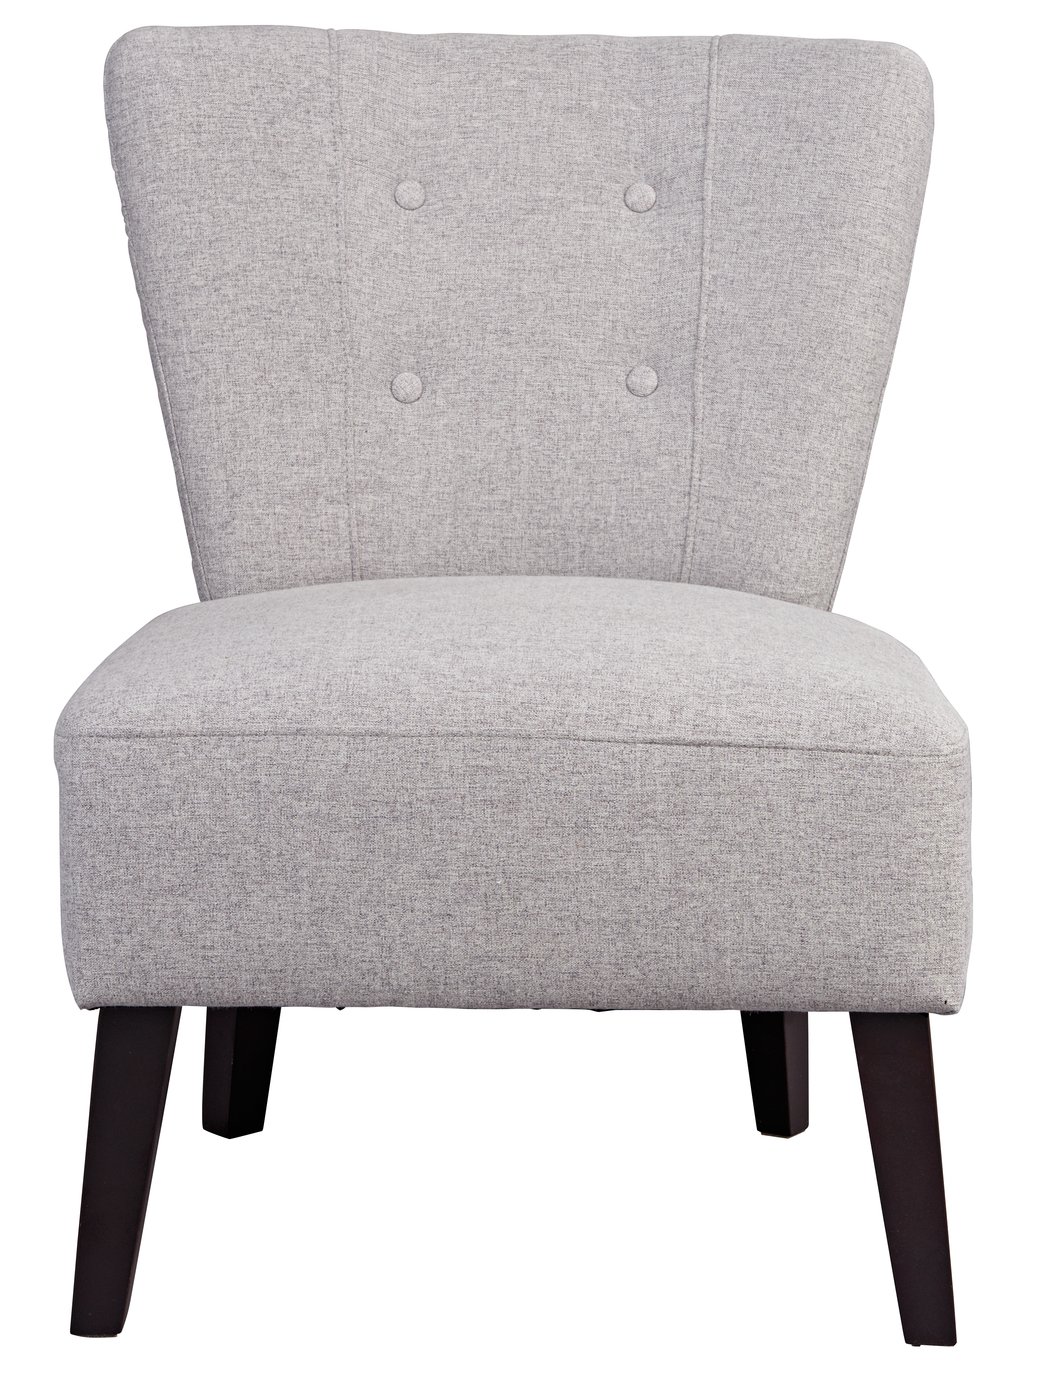 Argos Home Delilah Fabric Cocktail Chair - Light Grey